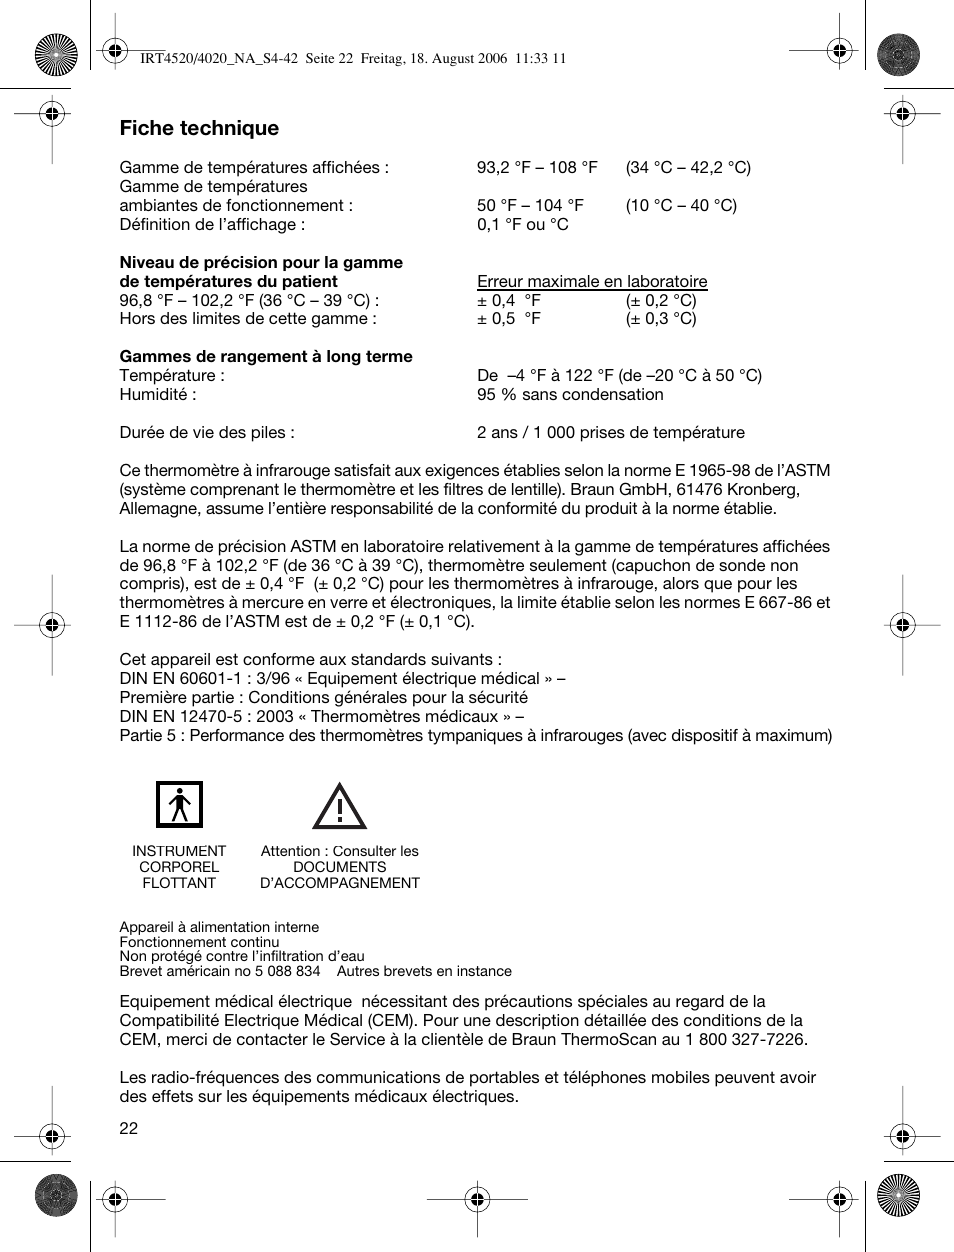 Fiche technique | Braun ThermoScan IRT 4520 User Manual | Page 22 / 42 |  Original mode